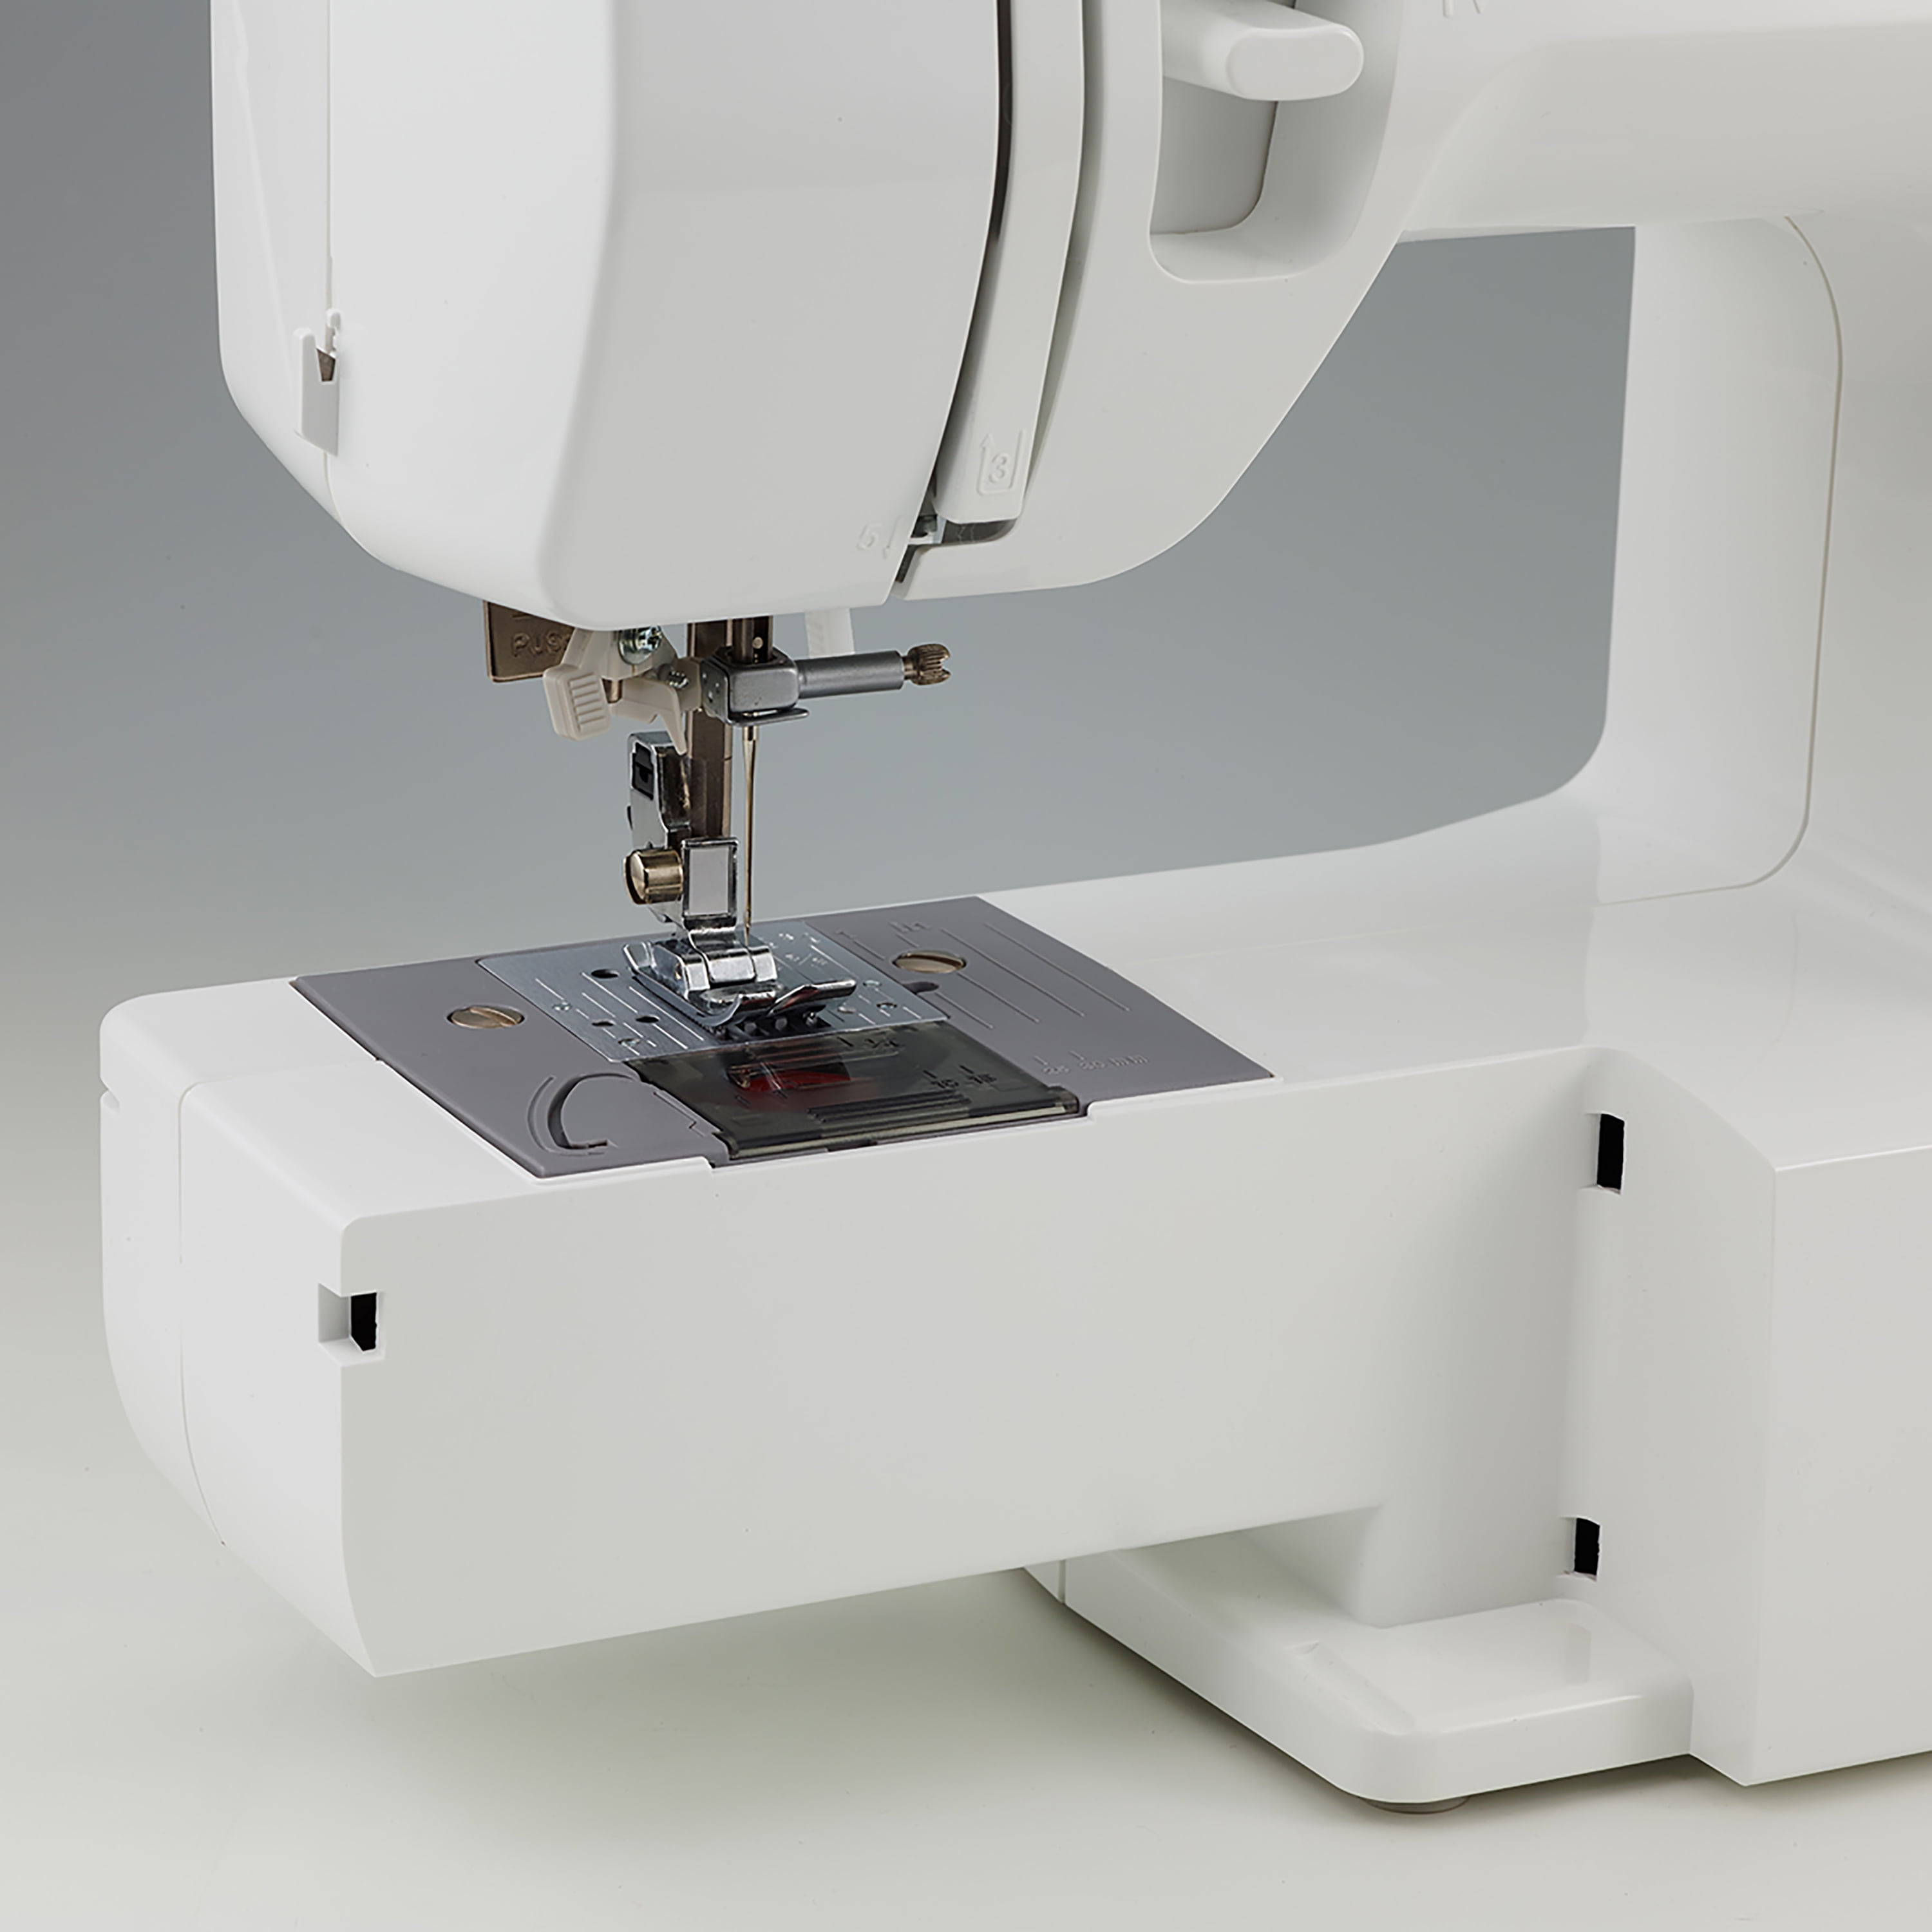 Buy Standard Quality China Wholesale Brother Sewing Machine, Gx37, 37  Built-in Stitches, 6 Included Sewing Feet $180 Direct from Factory at Sales  Elect